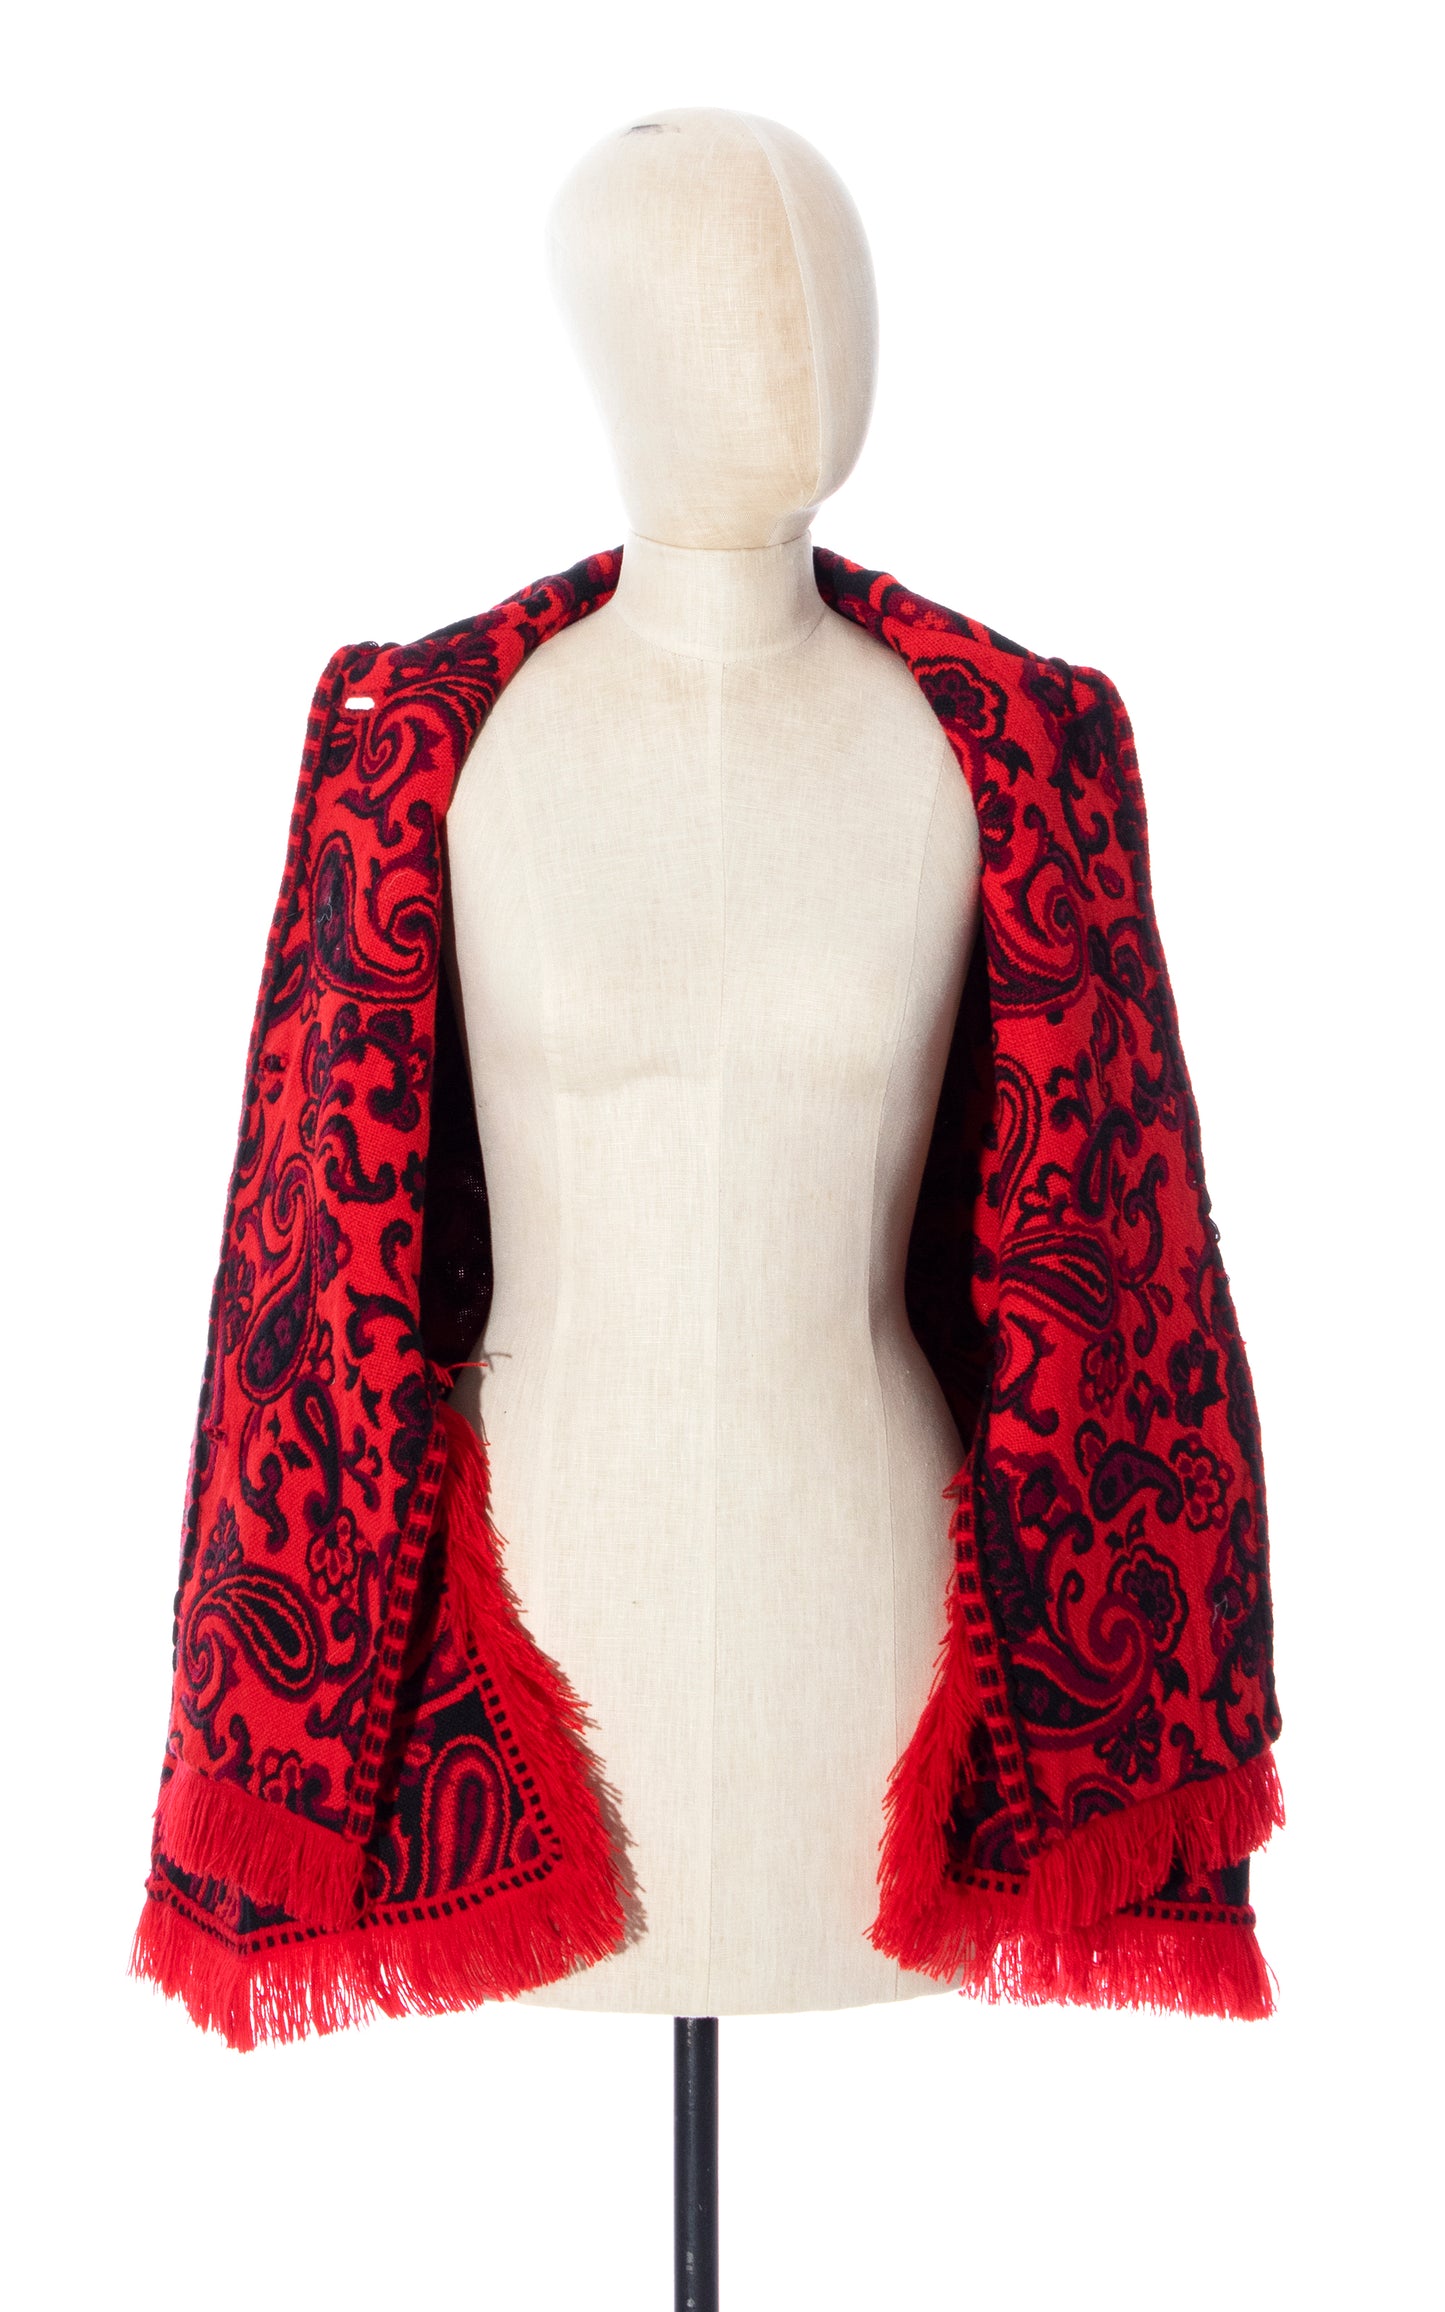 Vintage 70s 1970s Paisley Red Woven Psychedelic Cape with Fringe Birthday Life Vintage